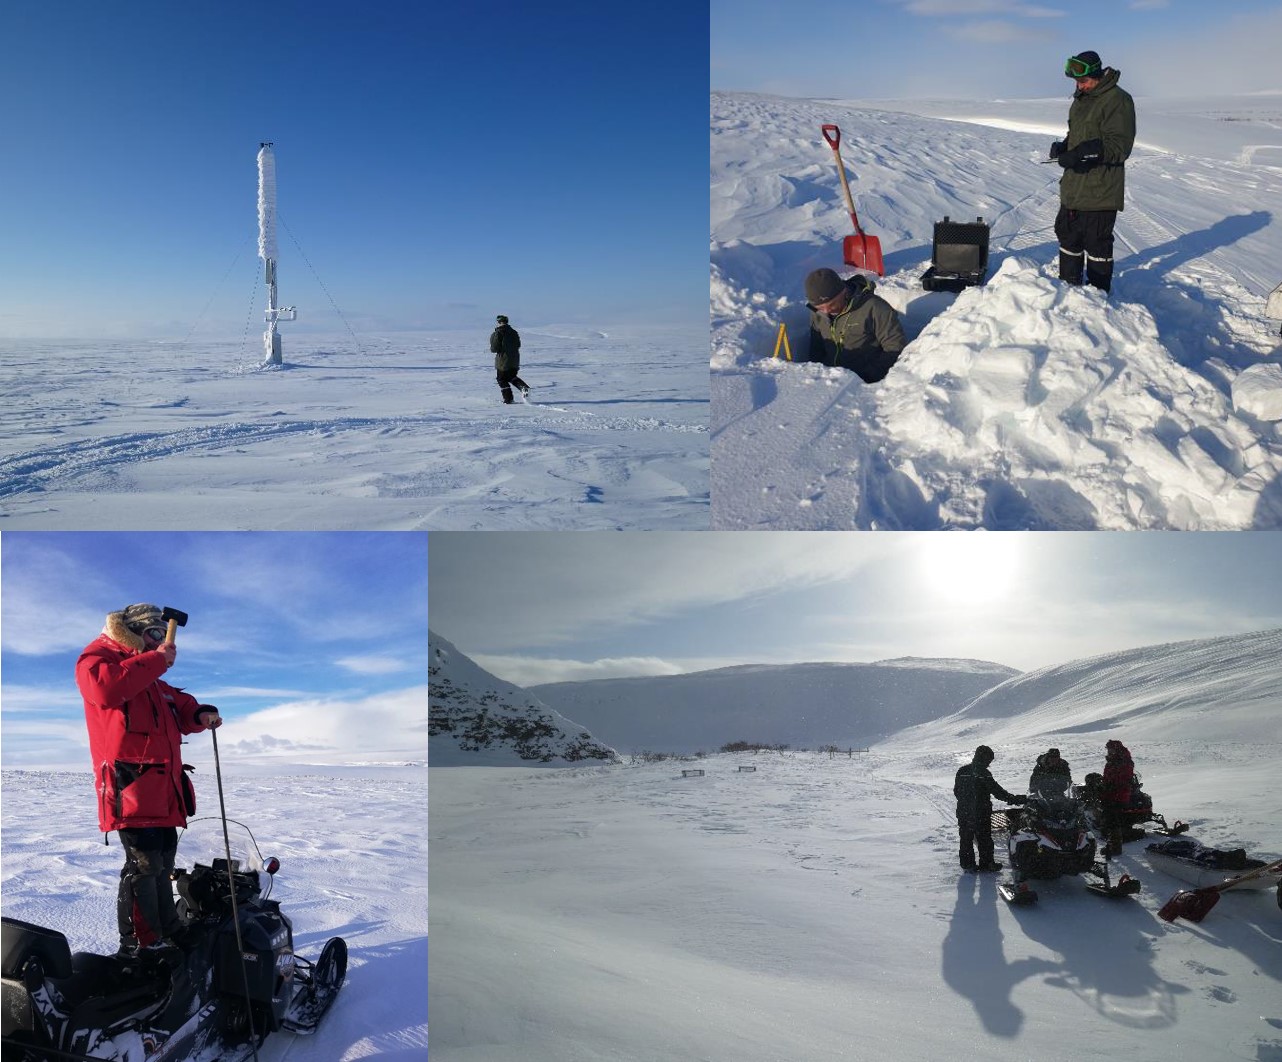 Upper left: COAT weather station at Boazoaivi (Reinhaugen), Upper right: Measurements of snow profile structure, Lower right: Hammering down a snow depth probe, Lower left: Little snow at Vestre Jakobselv study area (1m high small exclosures are visible). All photos: COAT.